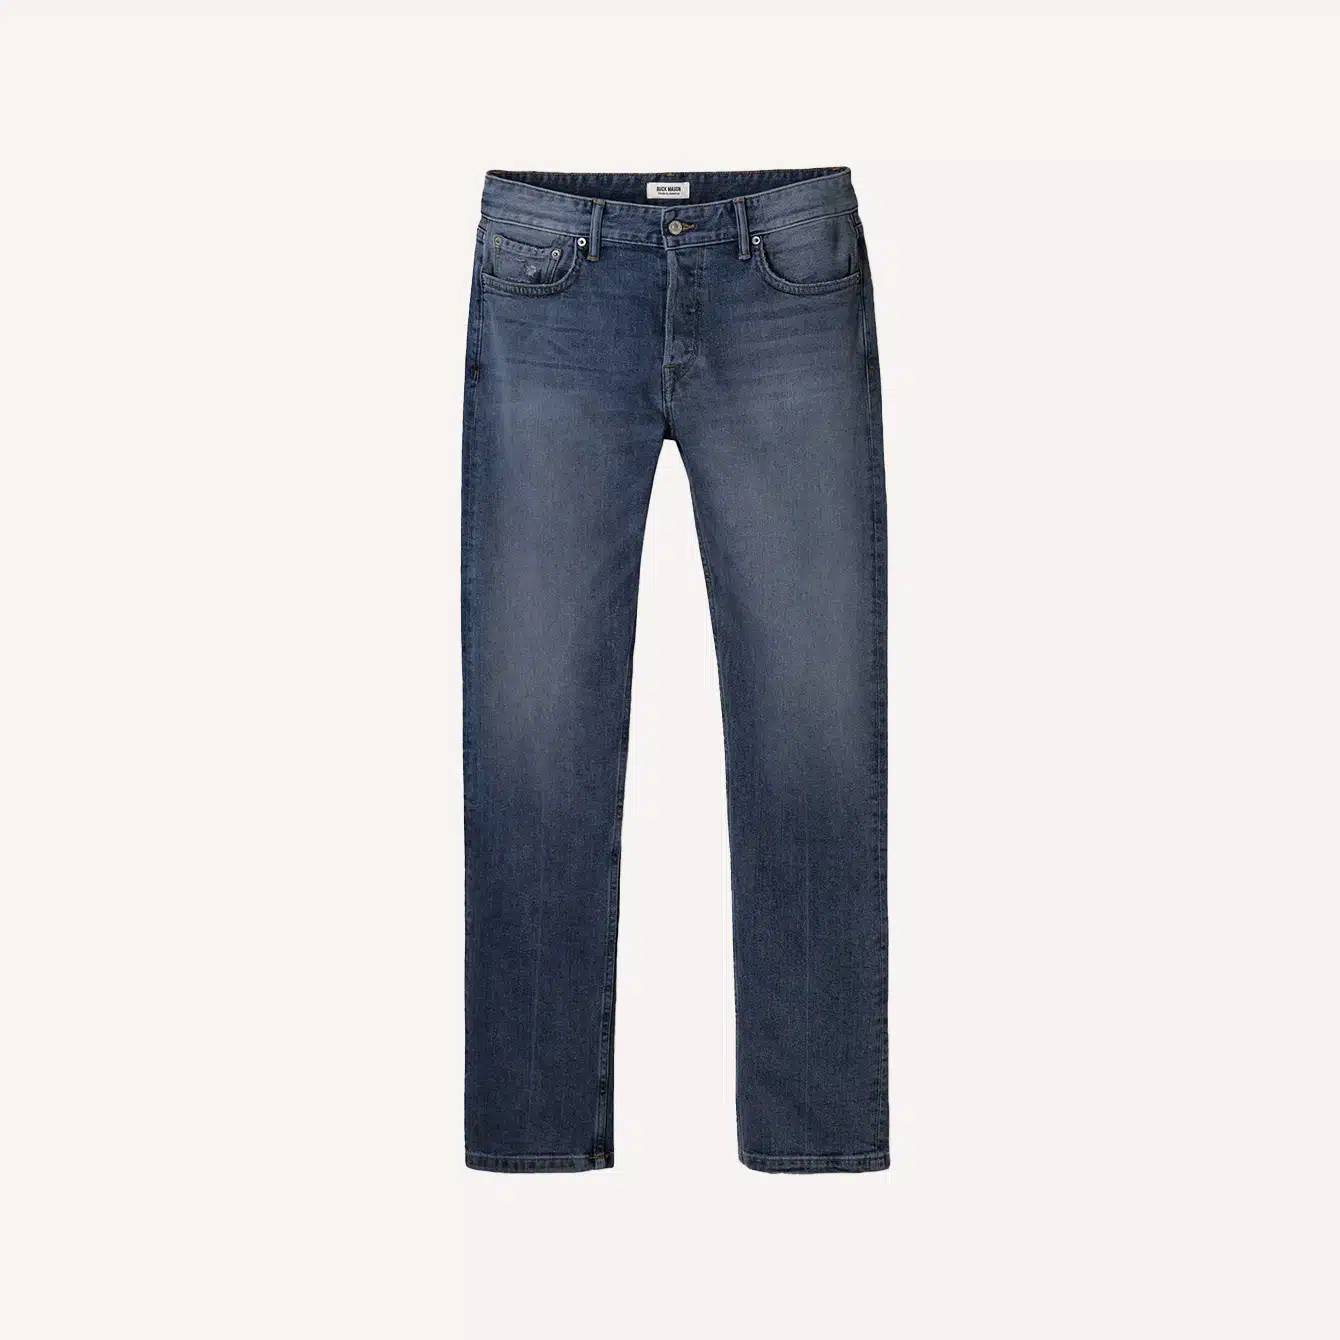 5 of the Best Casual Jeans for Men